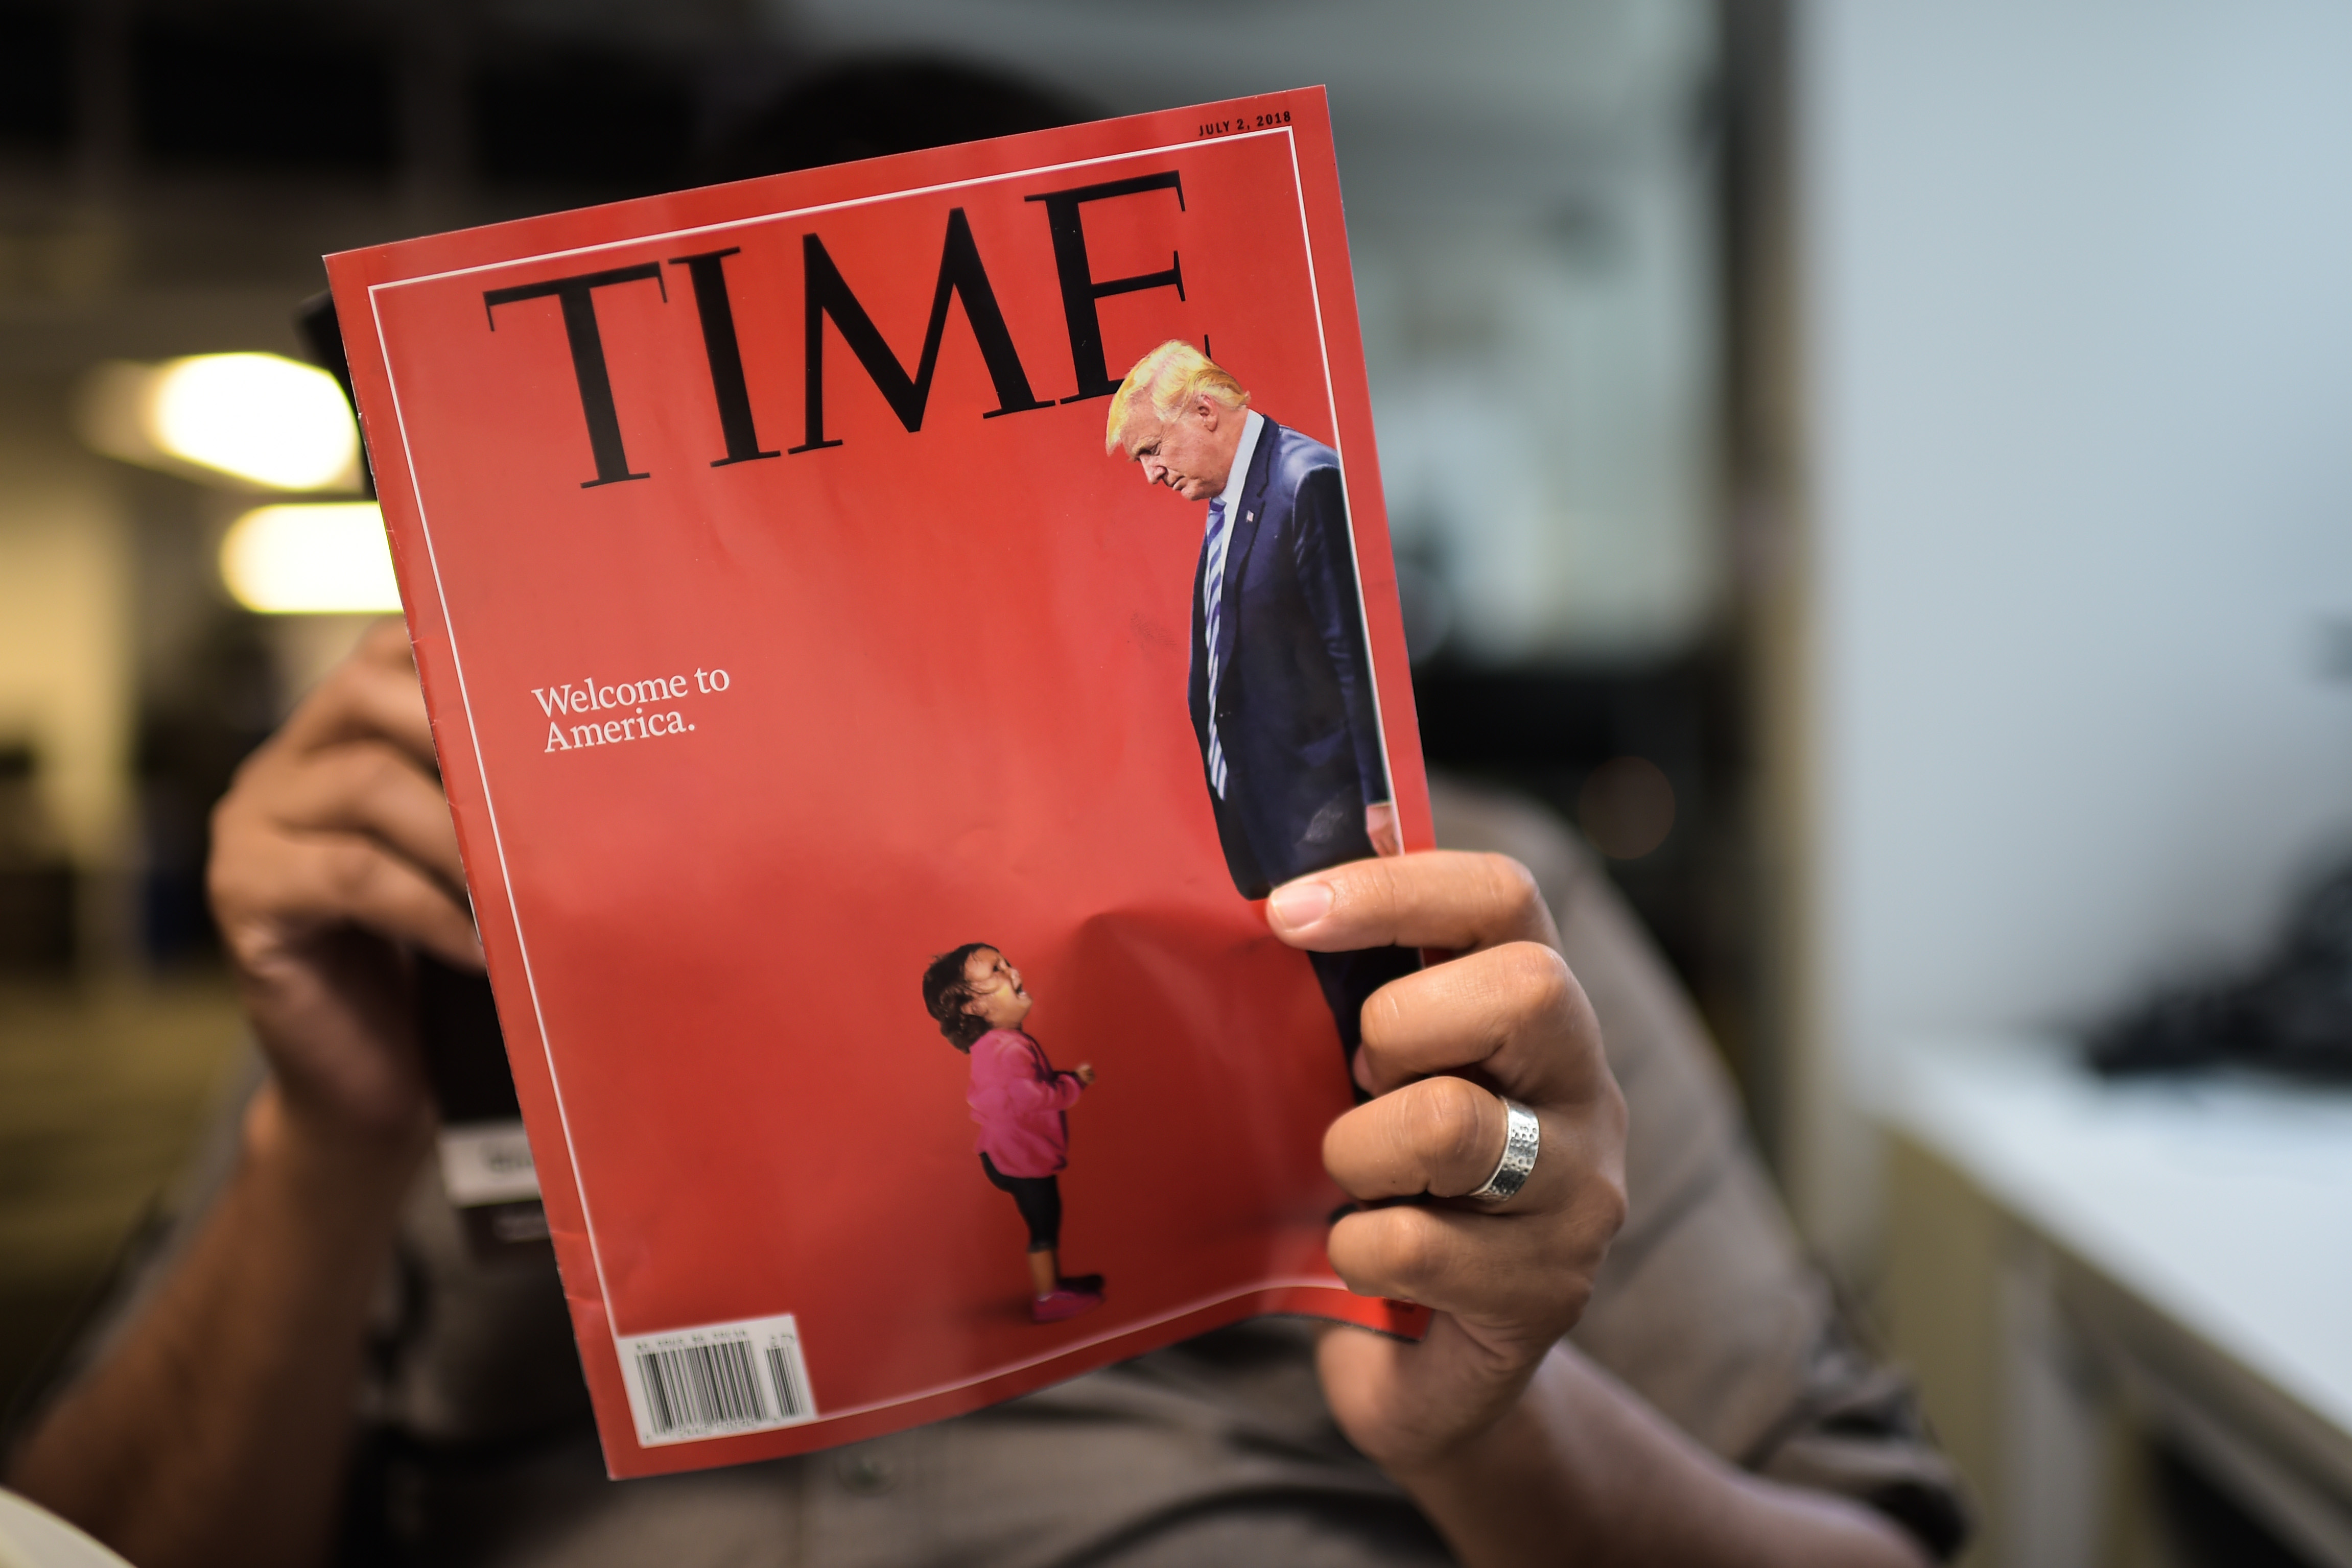 An AFP journalists reads a copy of Time Magazine with a front cover using a combination of pictures showing a crying child taken at the US Border Mexico and a picture of US President Donald Trump looking down, on June 22, 2018 in Washington DC. (Photo by ERIC BARADAT/AFP/Getty Images)